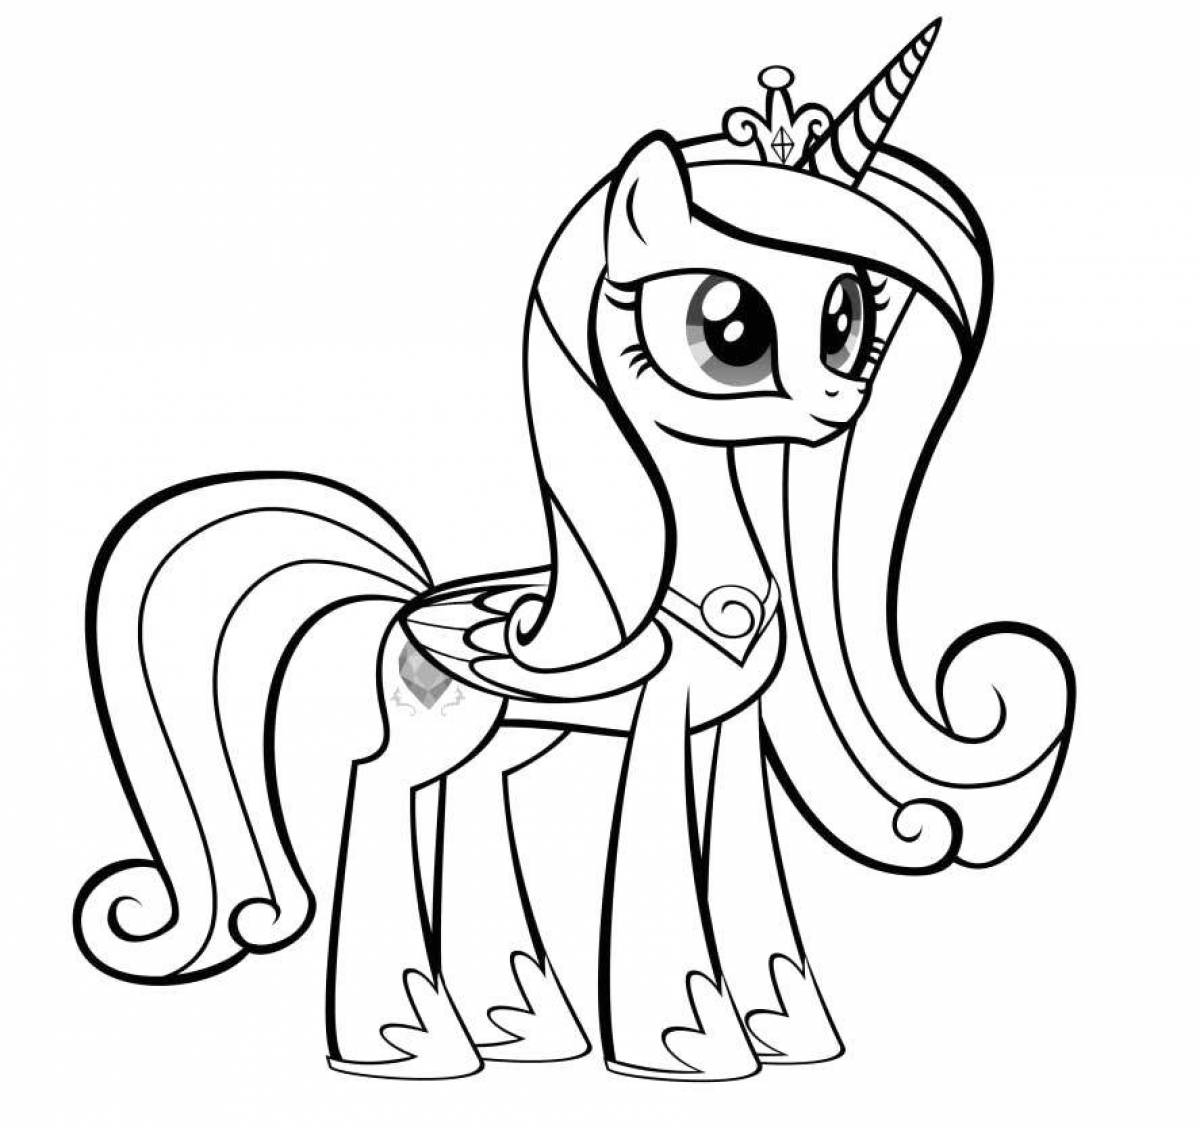 Coloring page funny life pony